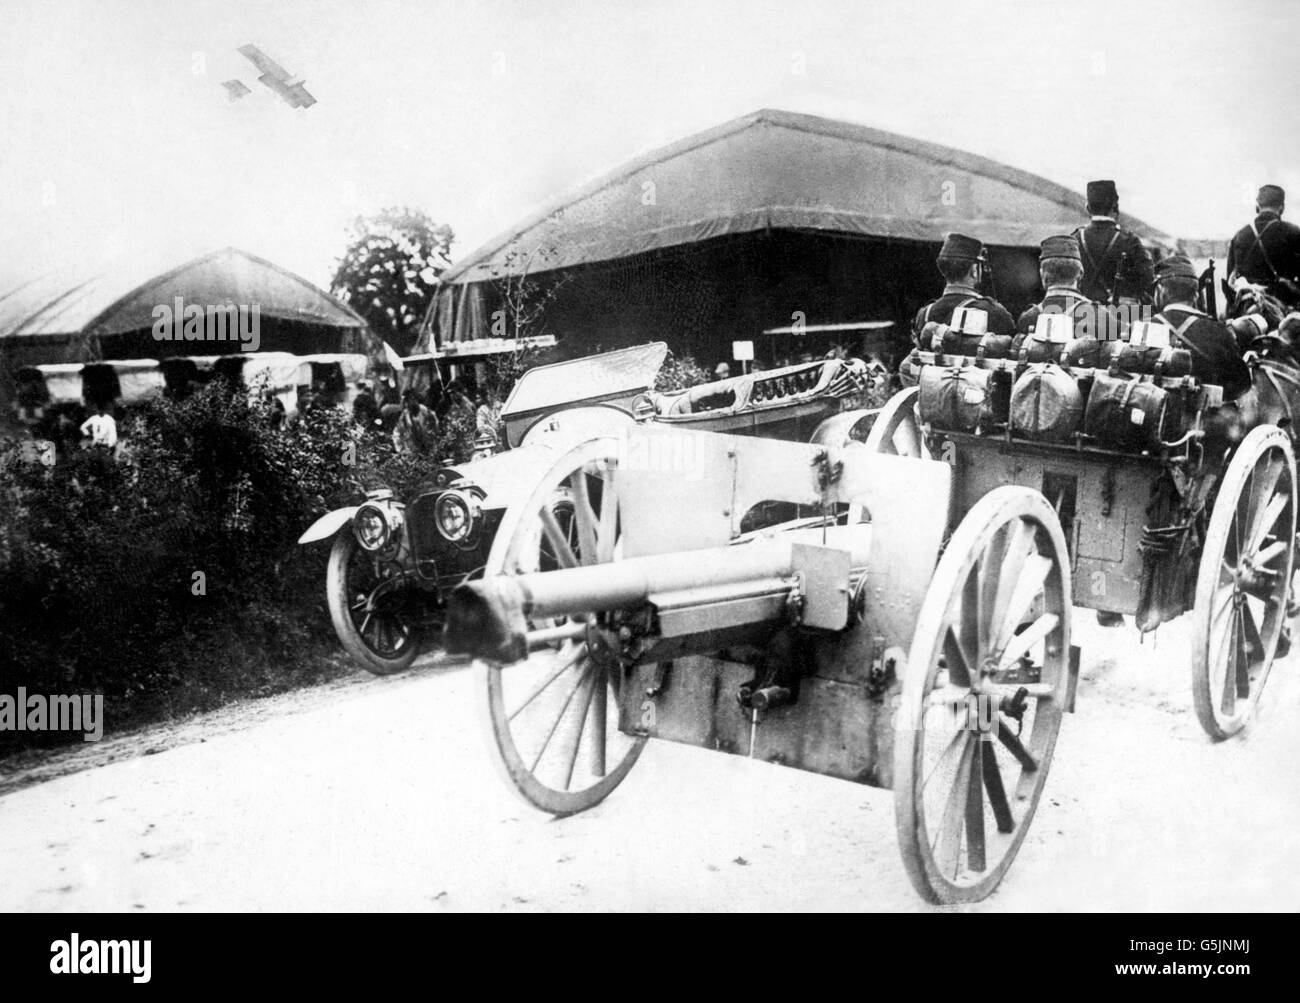 A French 75 gun passing through a village in France, with a Farman biplane overhead acting as scout. Stock Photo